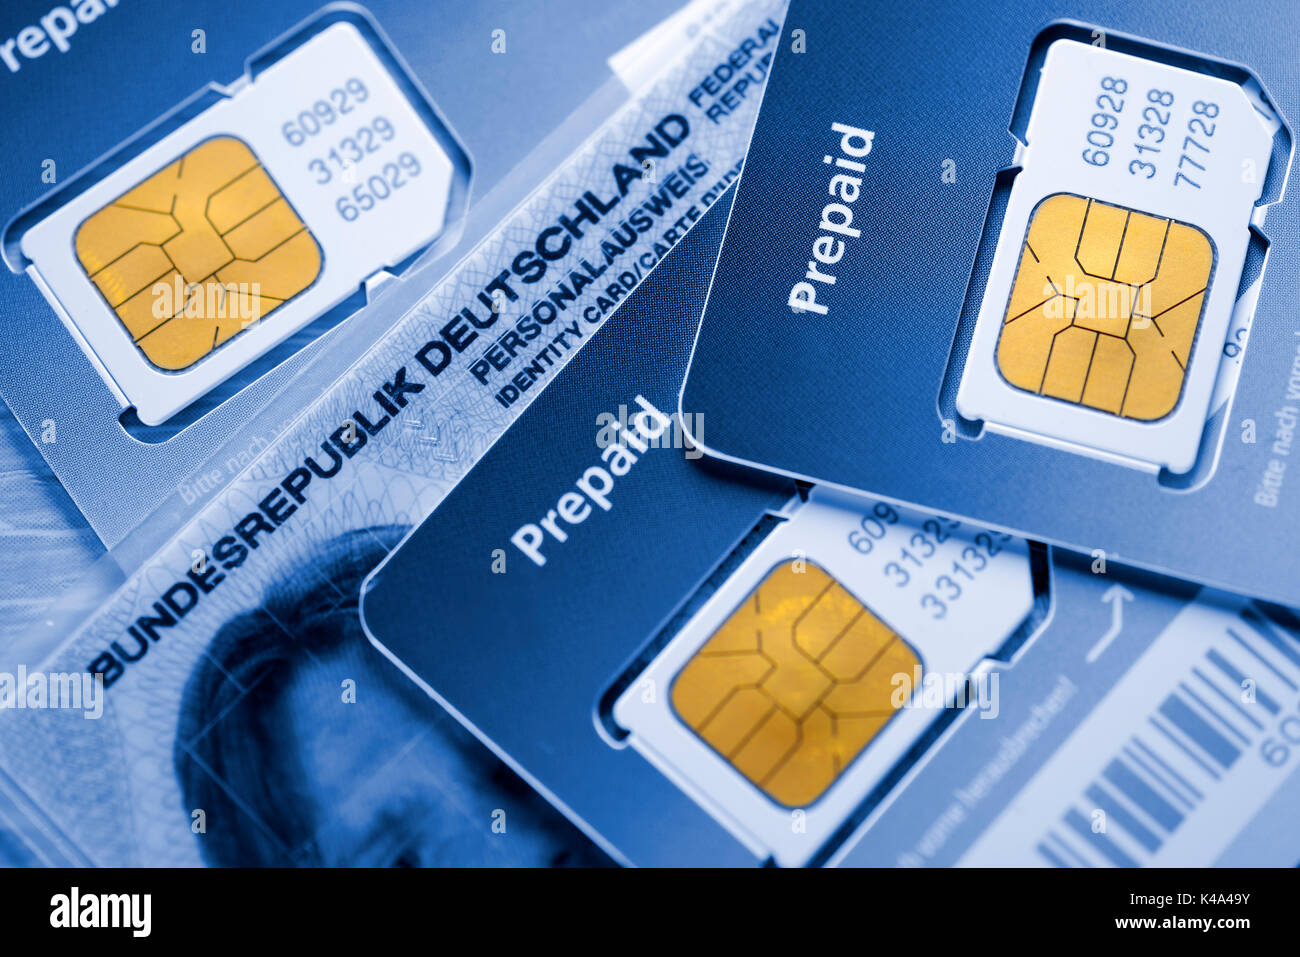 Prepaid Cards And German Identity Card Stock Photo